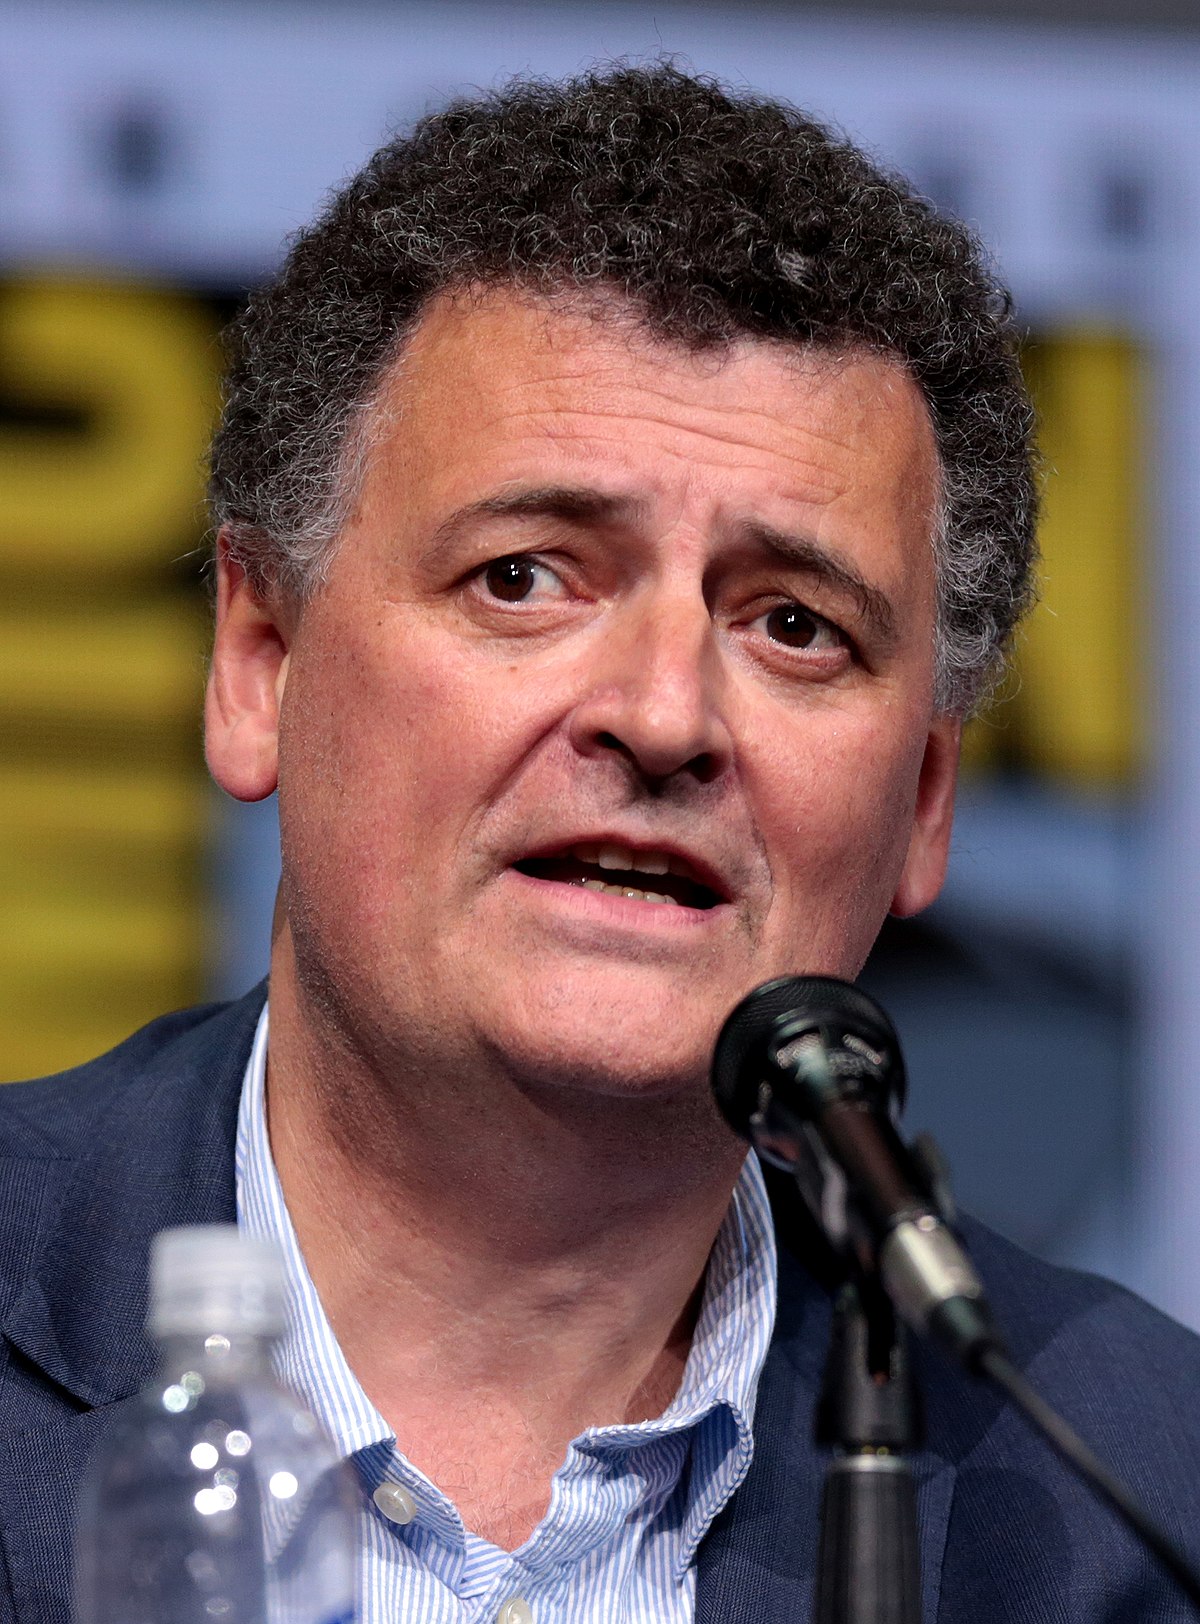 Moffat Is Back! Steven Moffat Writes Episode For New Season of Doctor
Who With Julie-Anne Robinson Directing